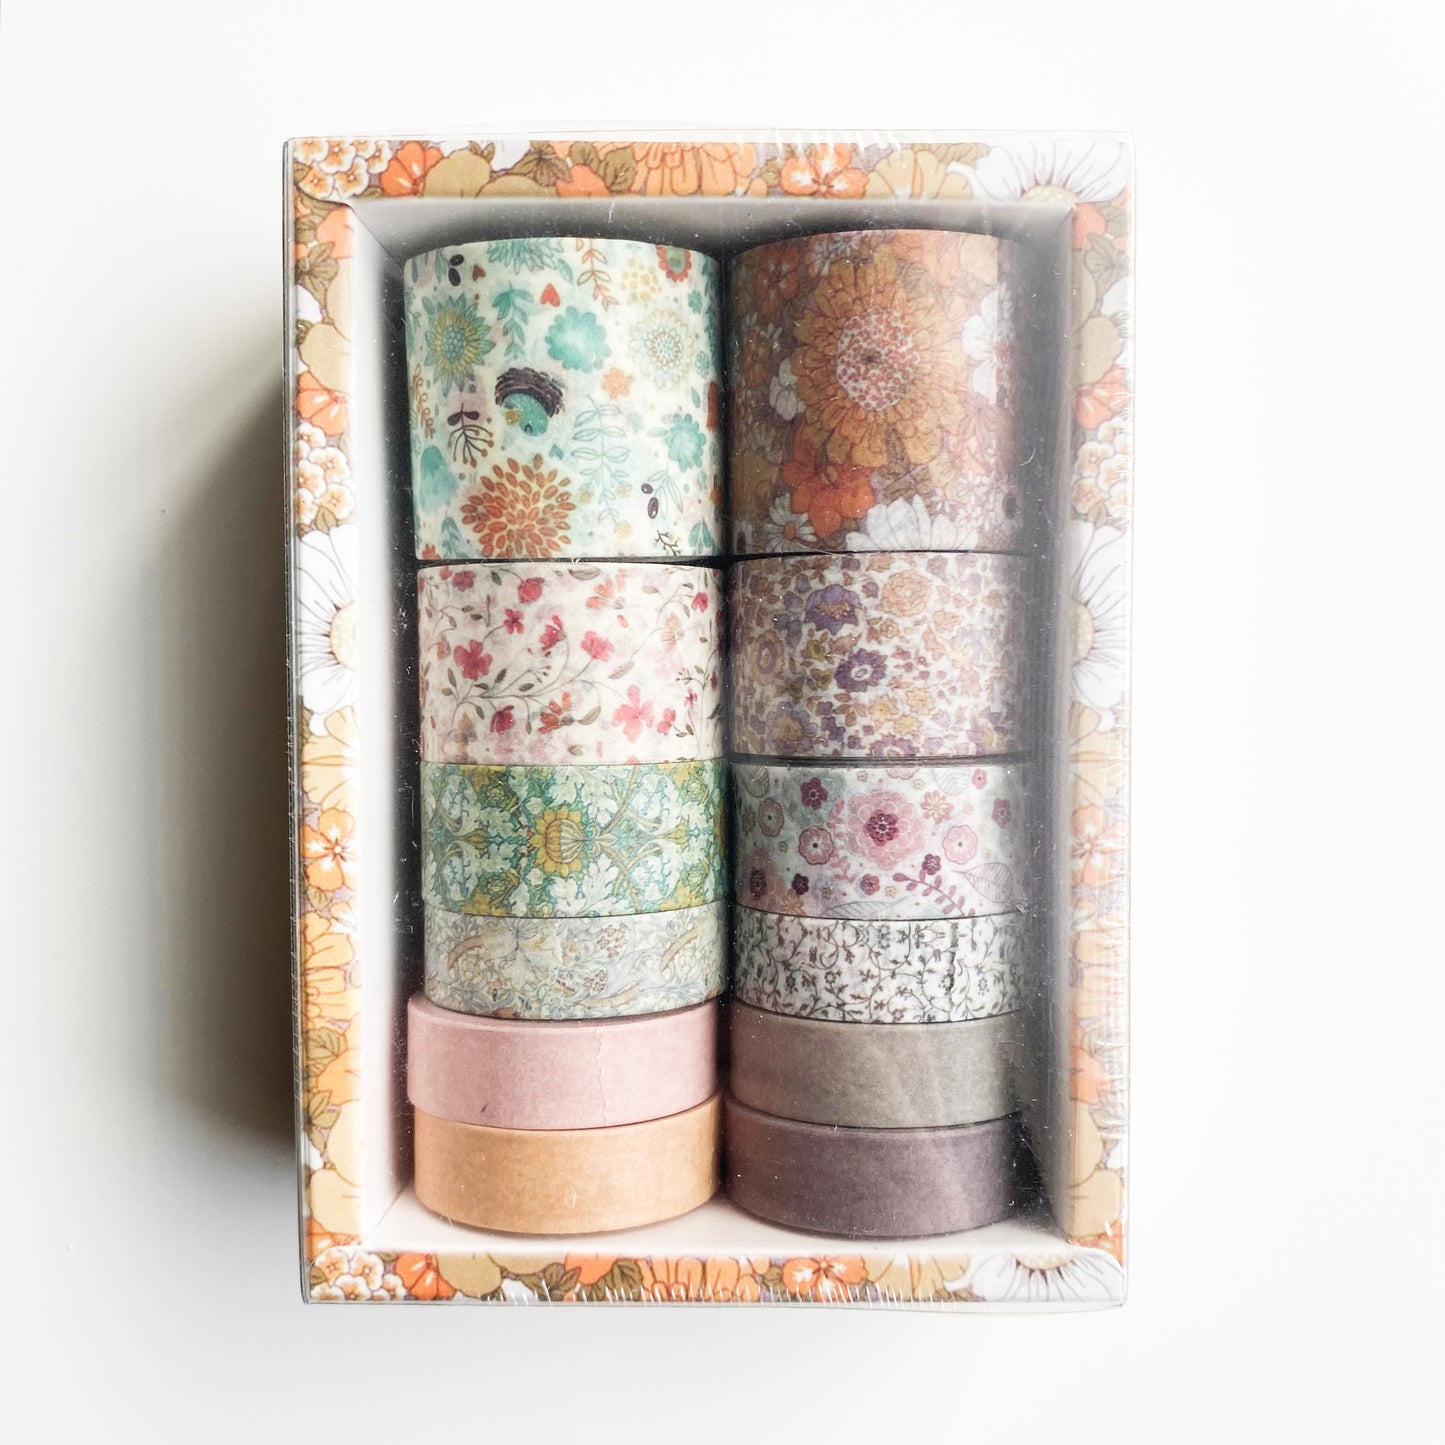 A8_Floral Thoughts_12 rolls Washi tape set